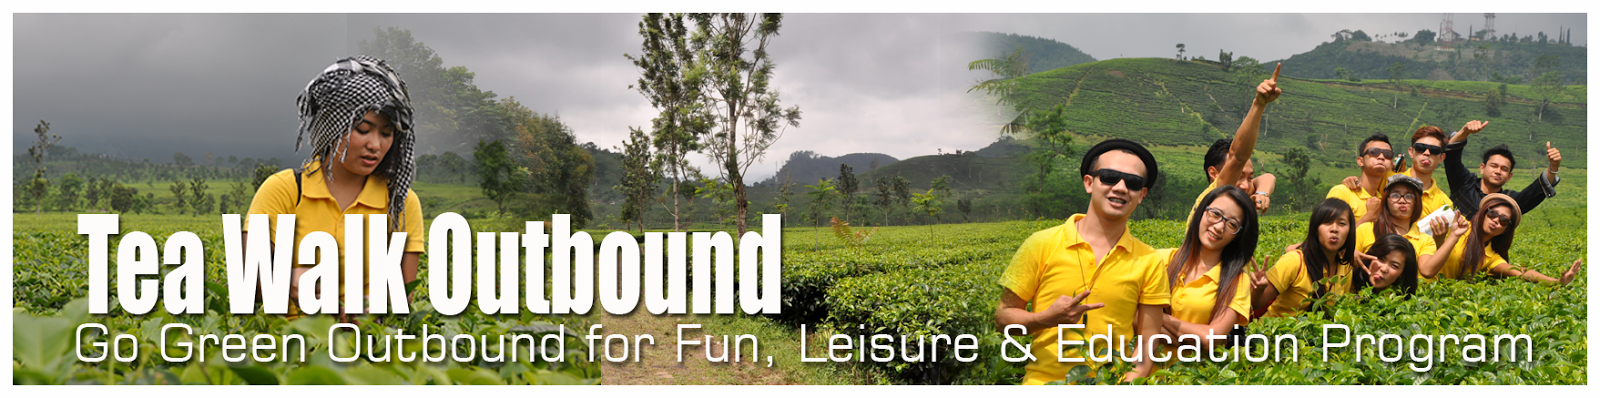 WELCOME : Tea Walk Outbound West Java Gathering Family Adventure 